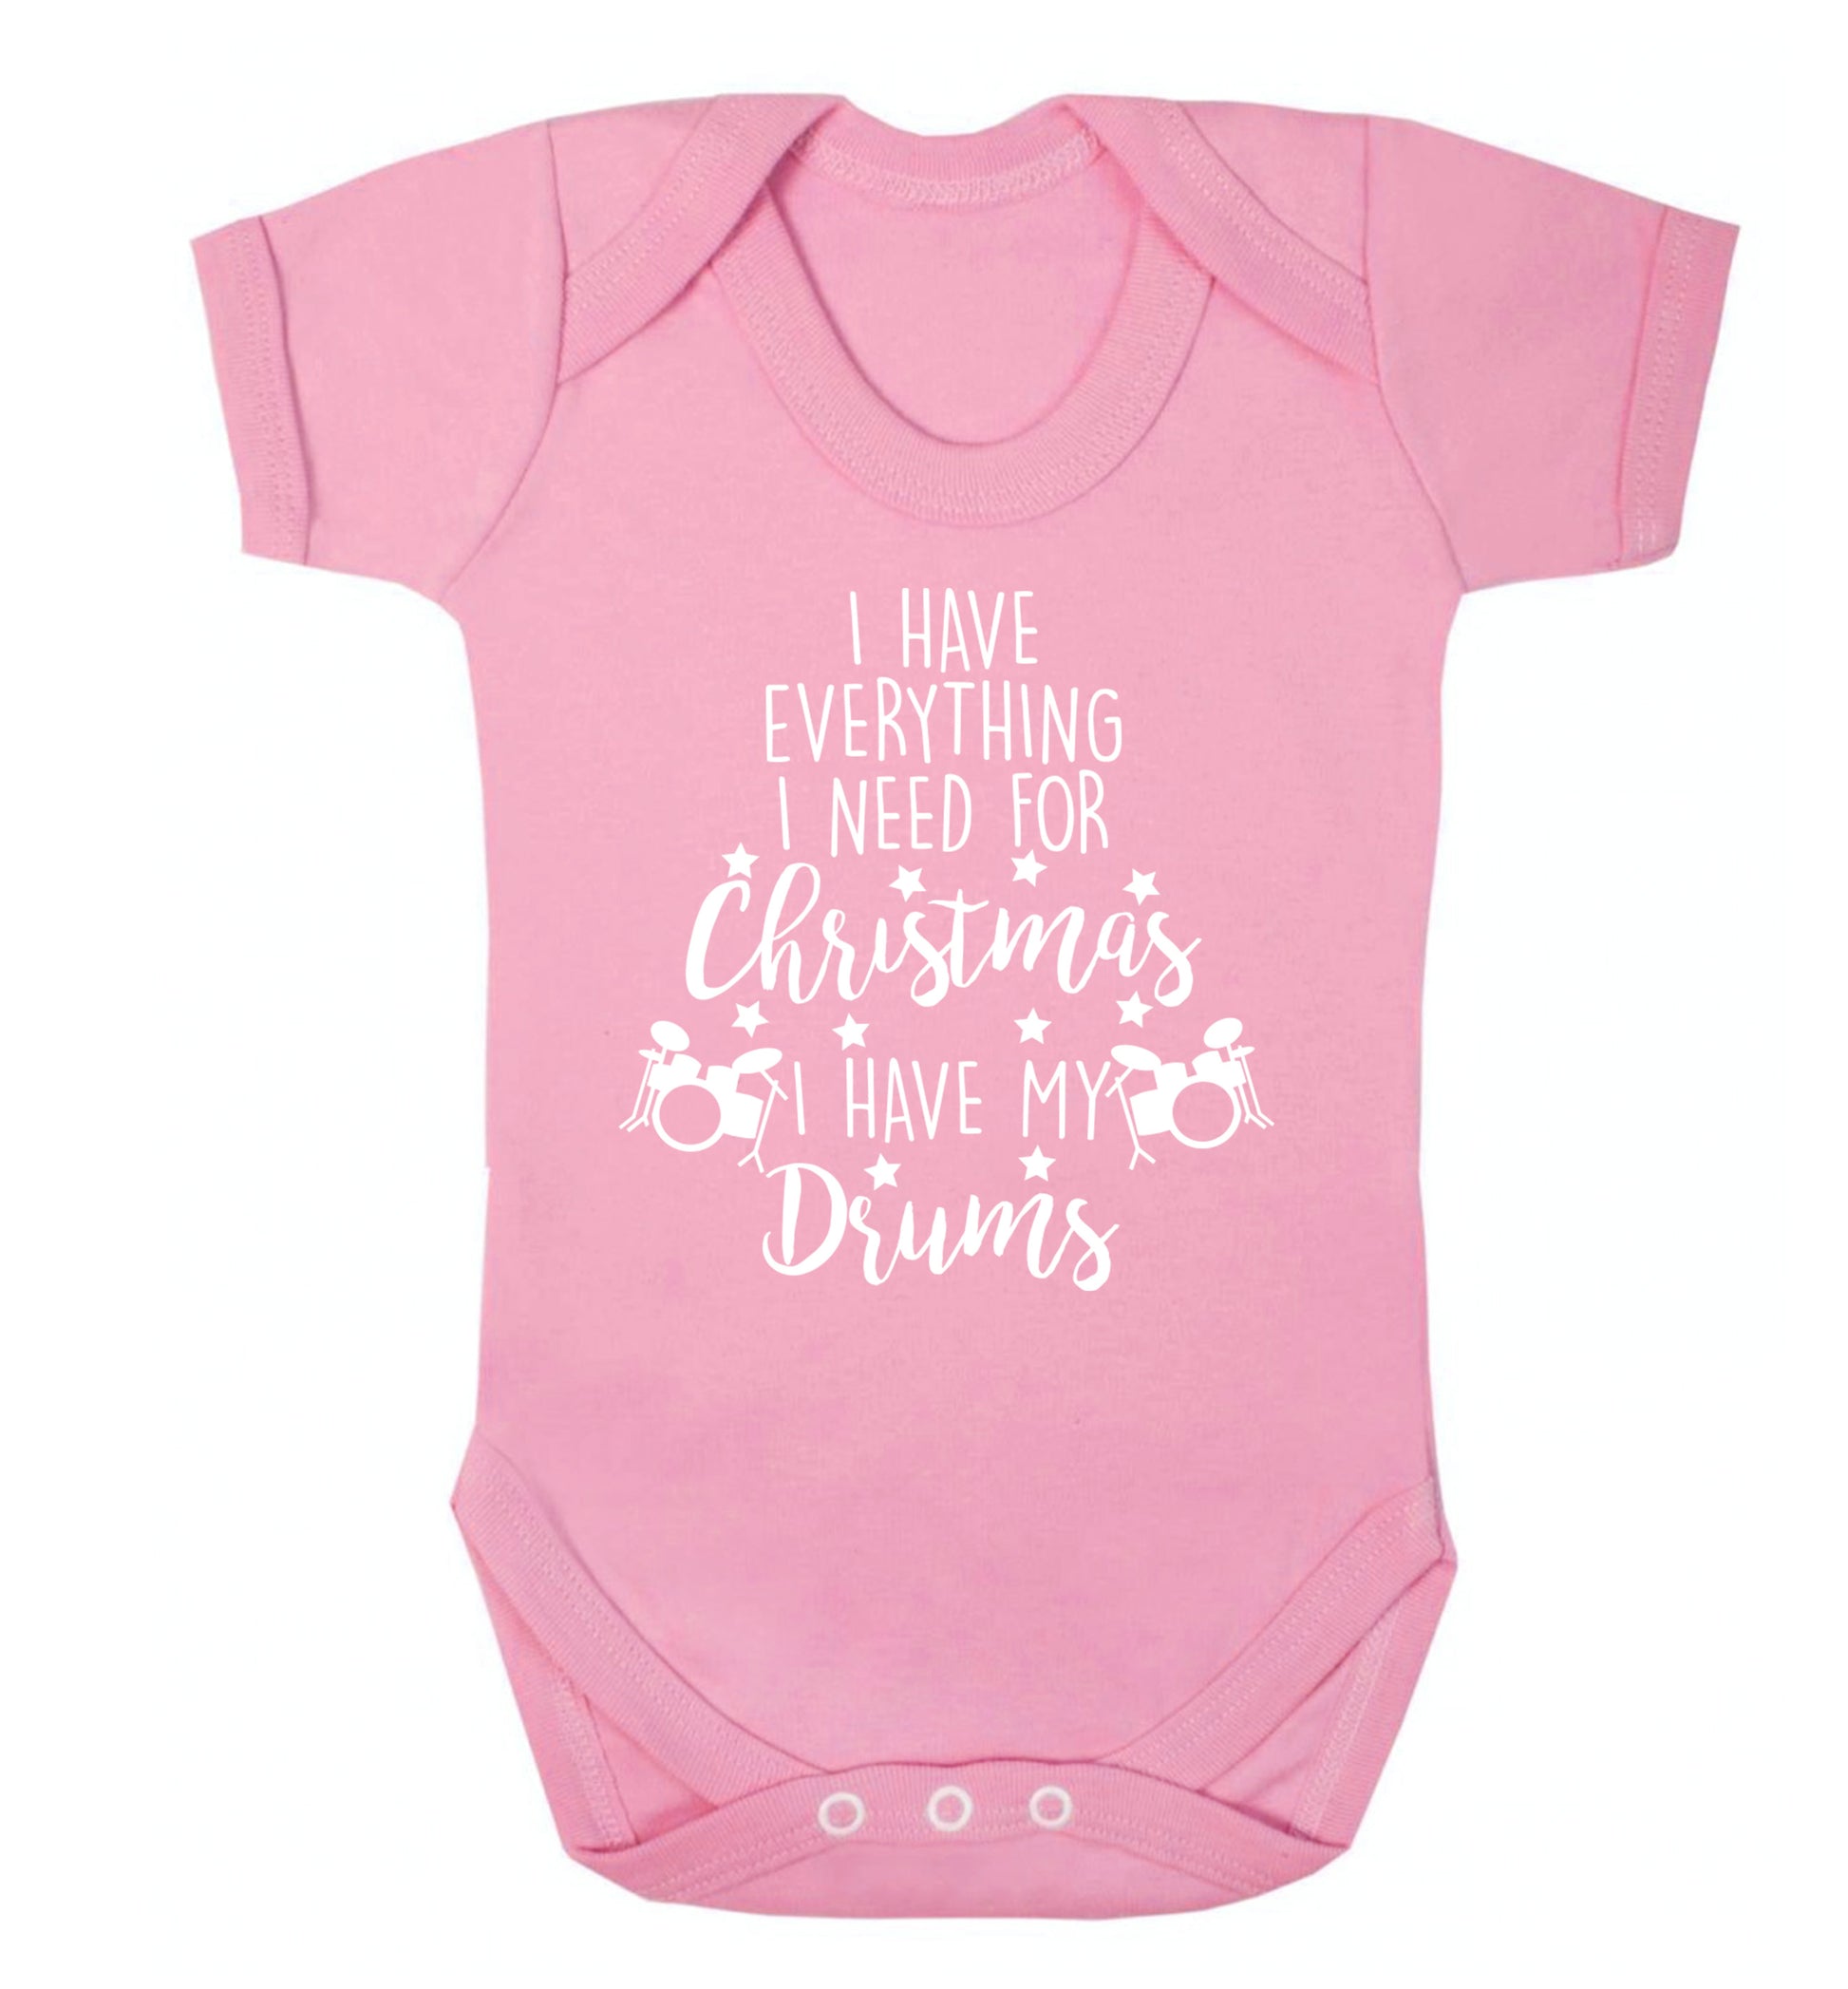 I have everything I need for Christmas I have my drums! Baby Vest pale pink 18-24 months